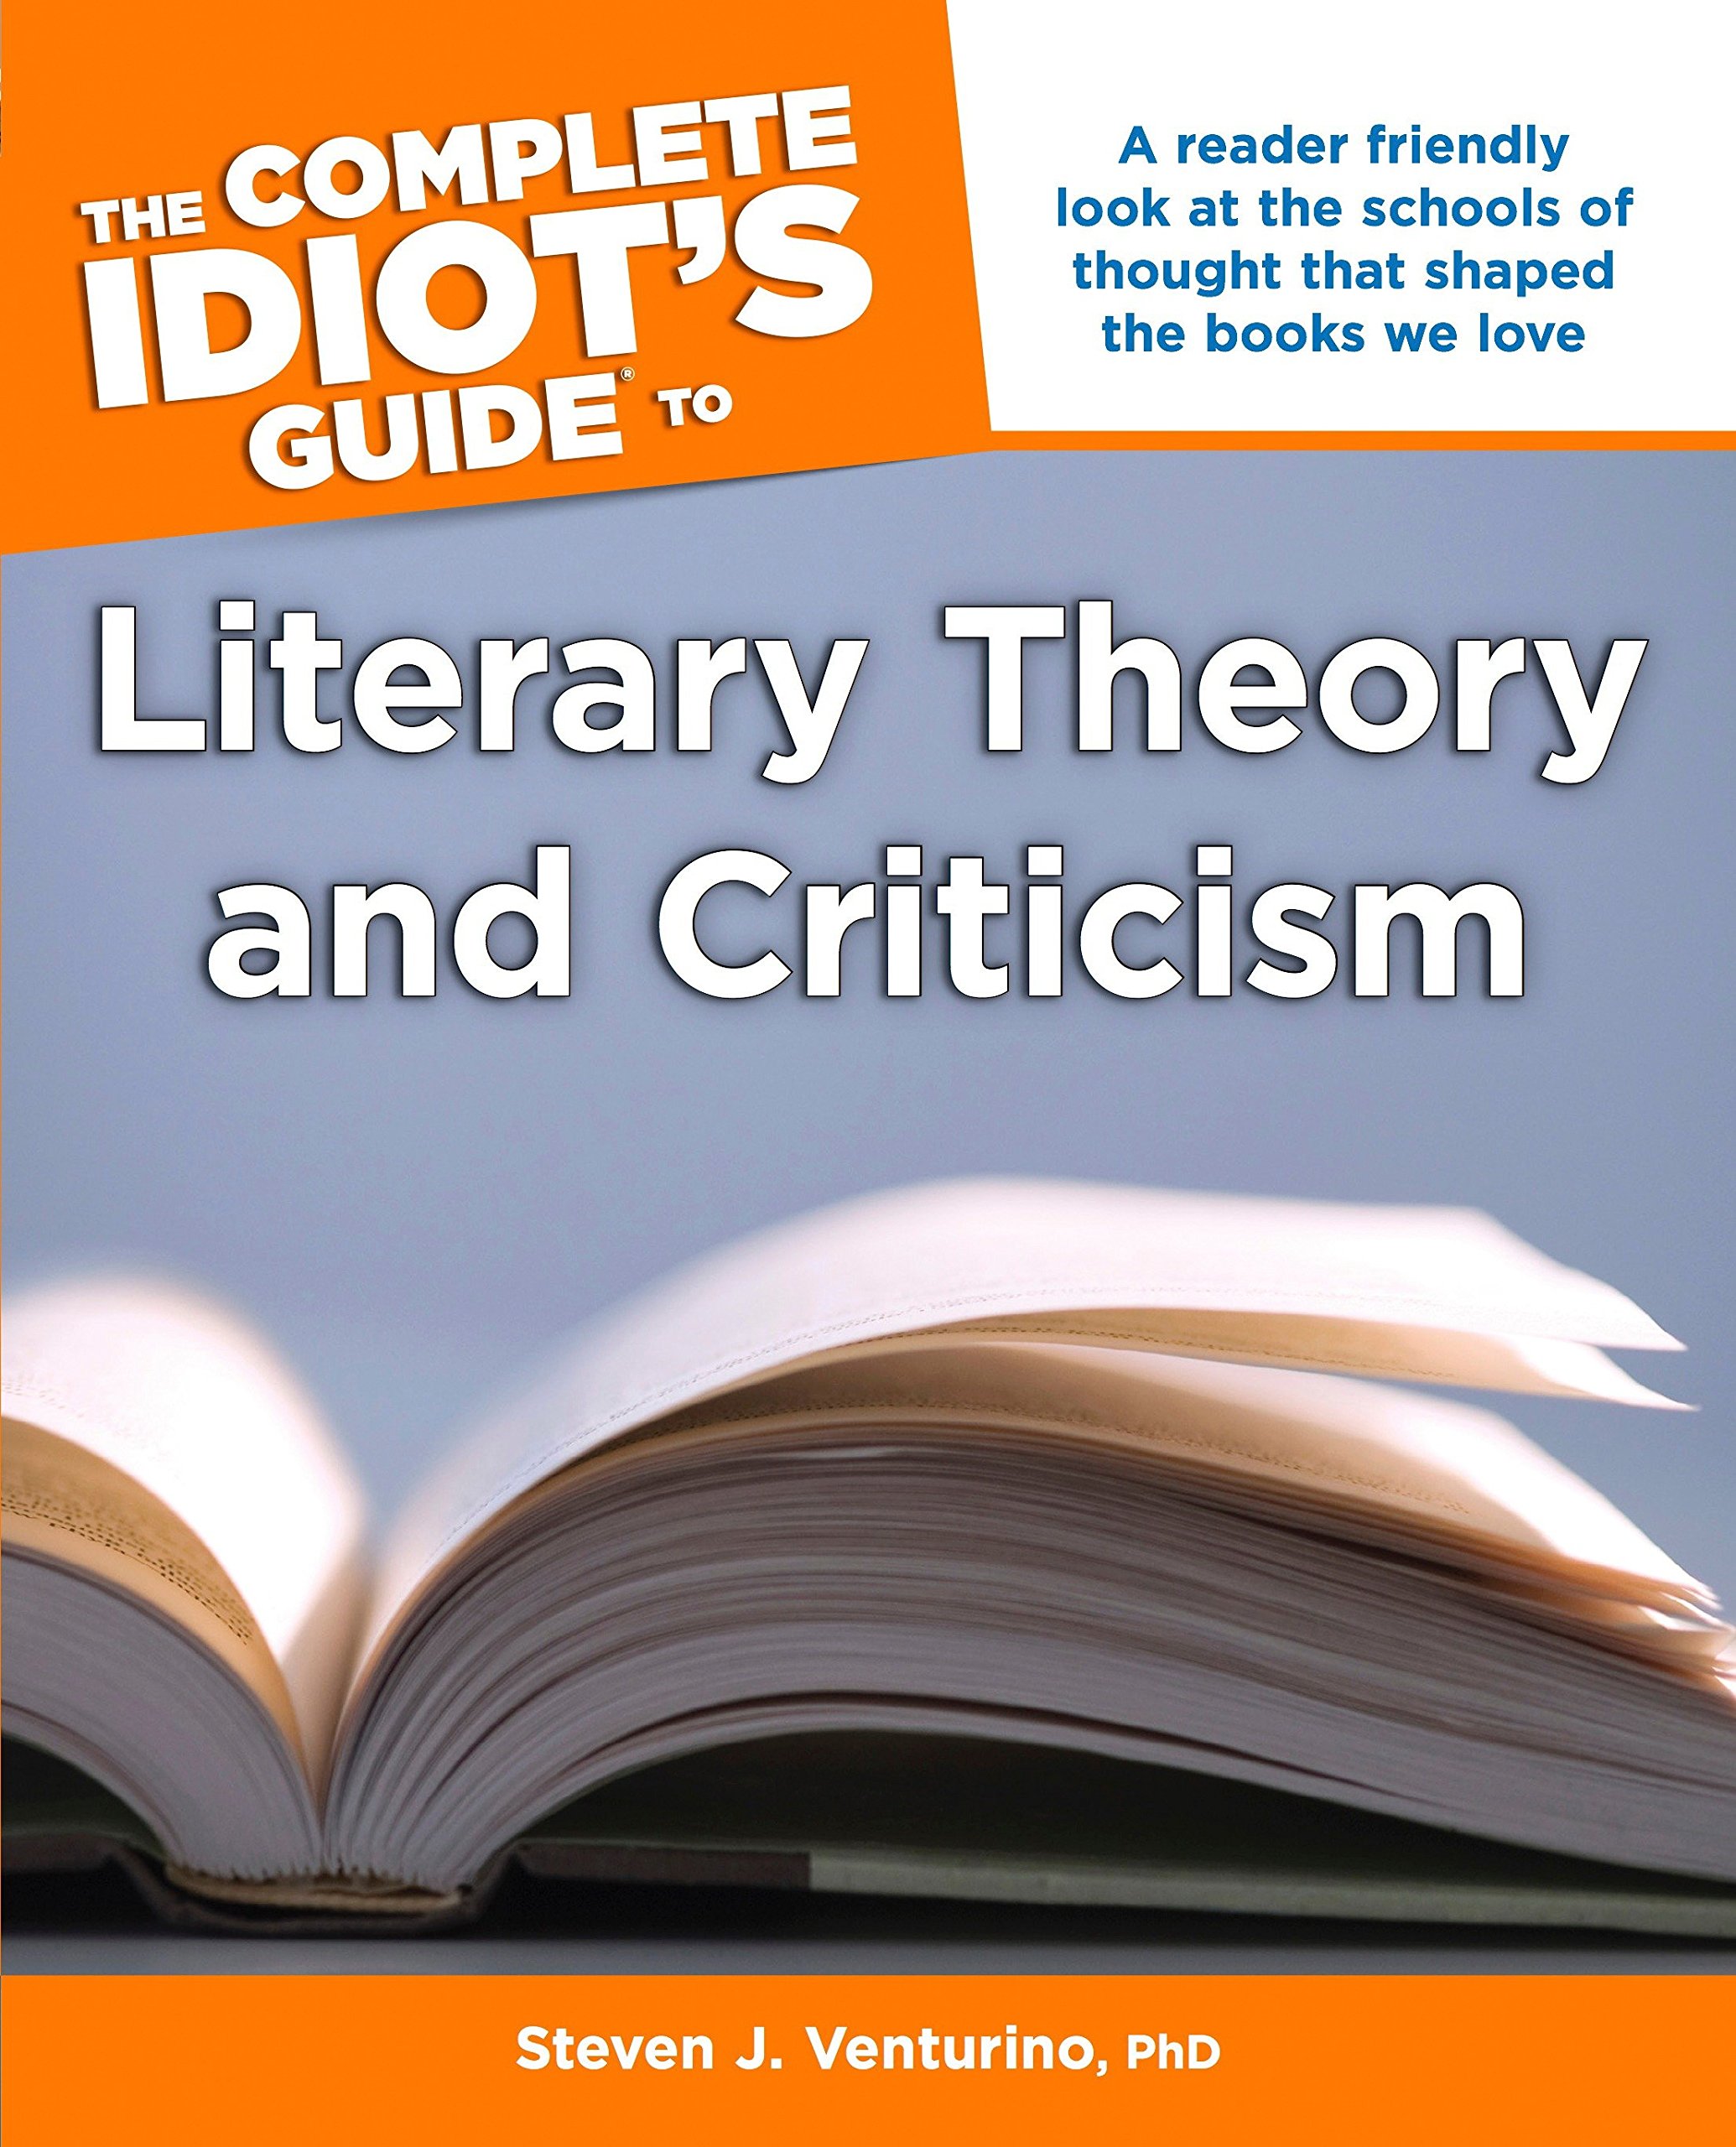 A student guide to contemporary literary theory pdf free